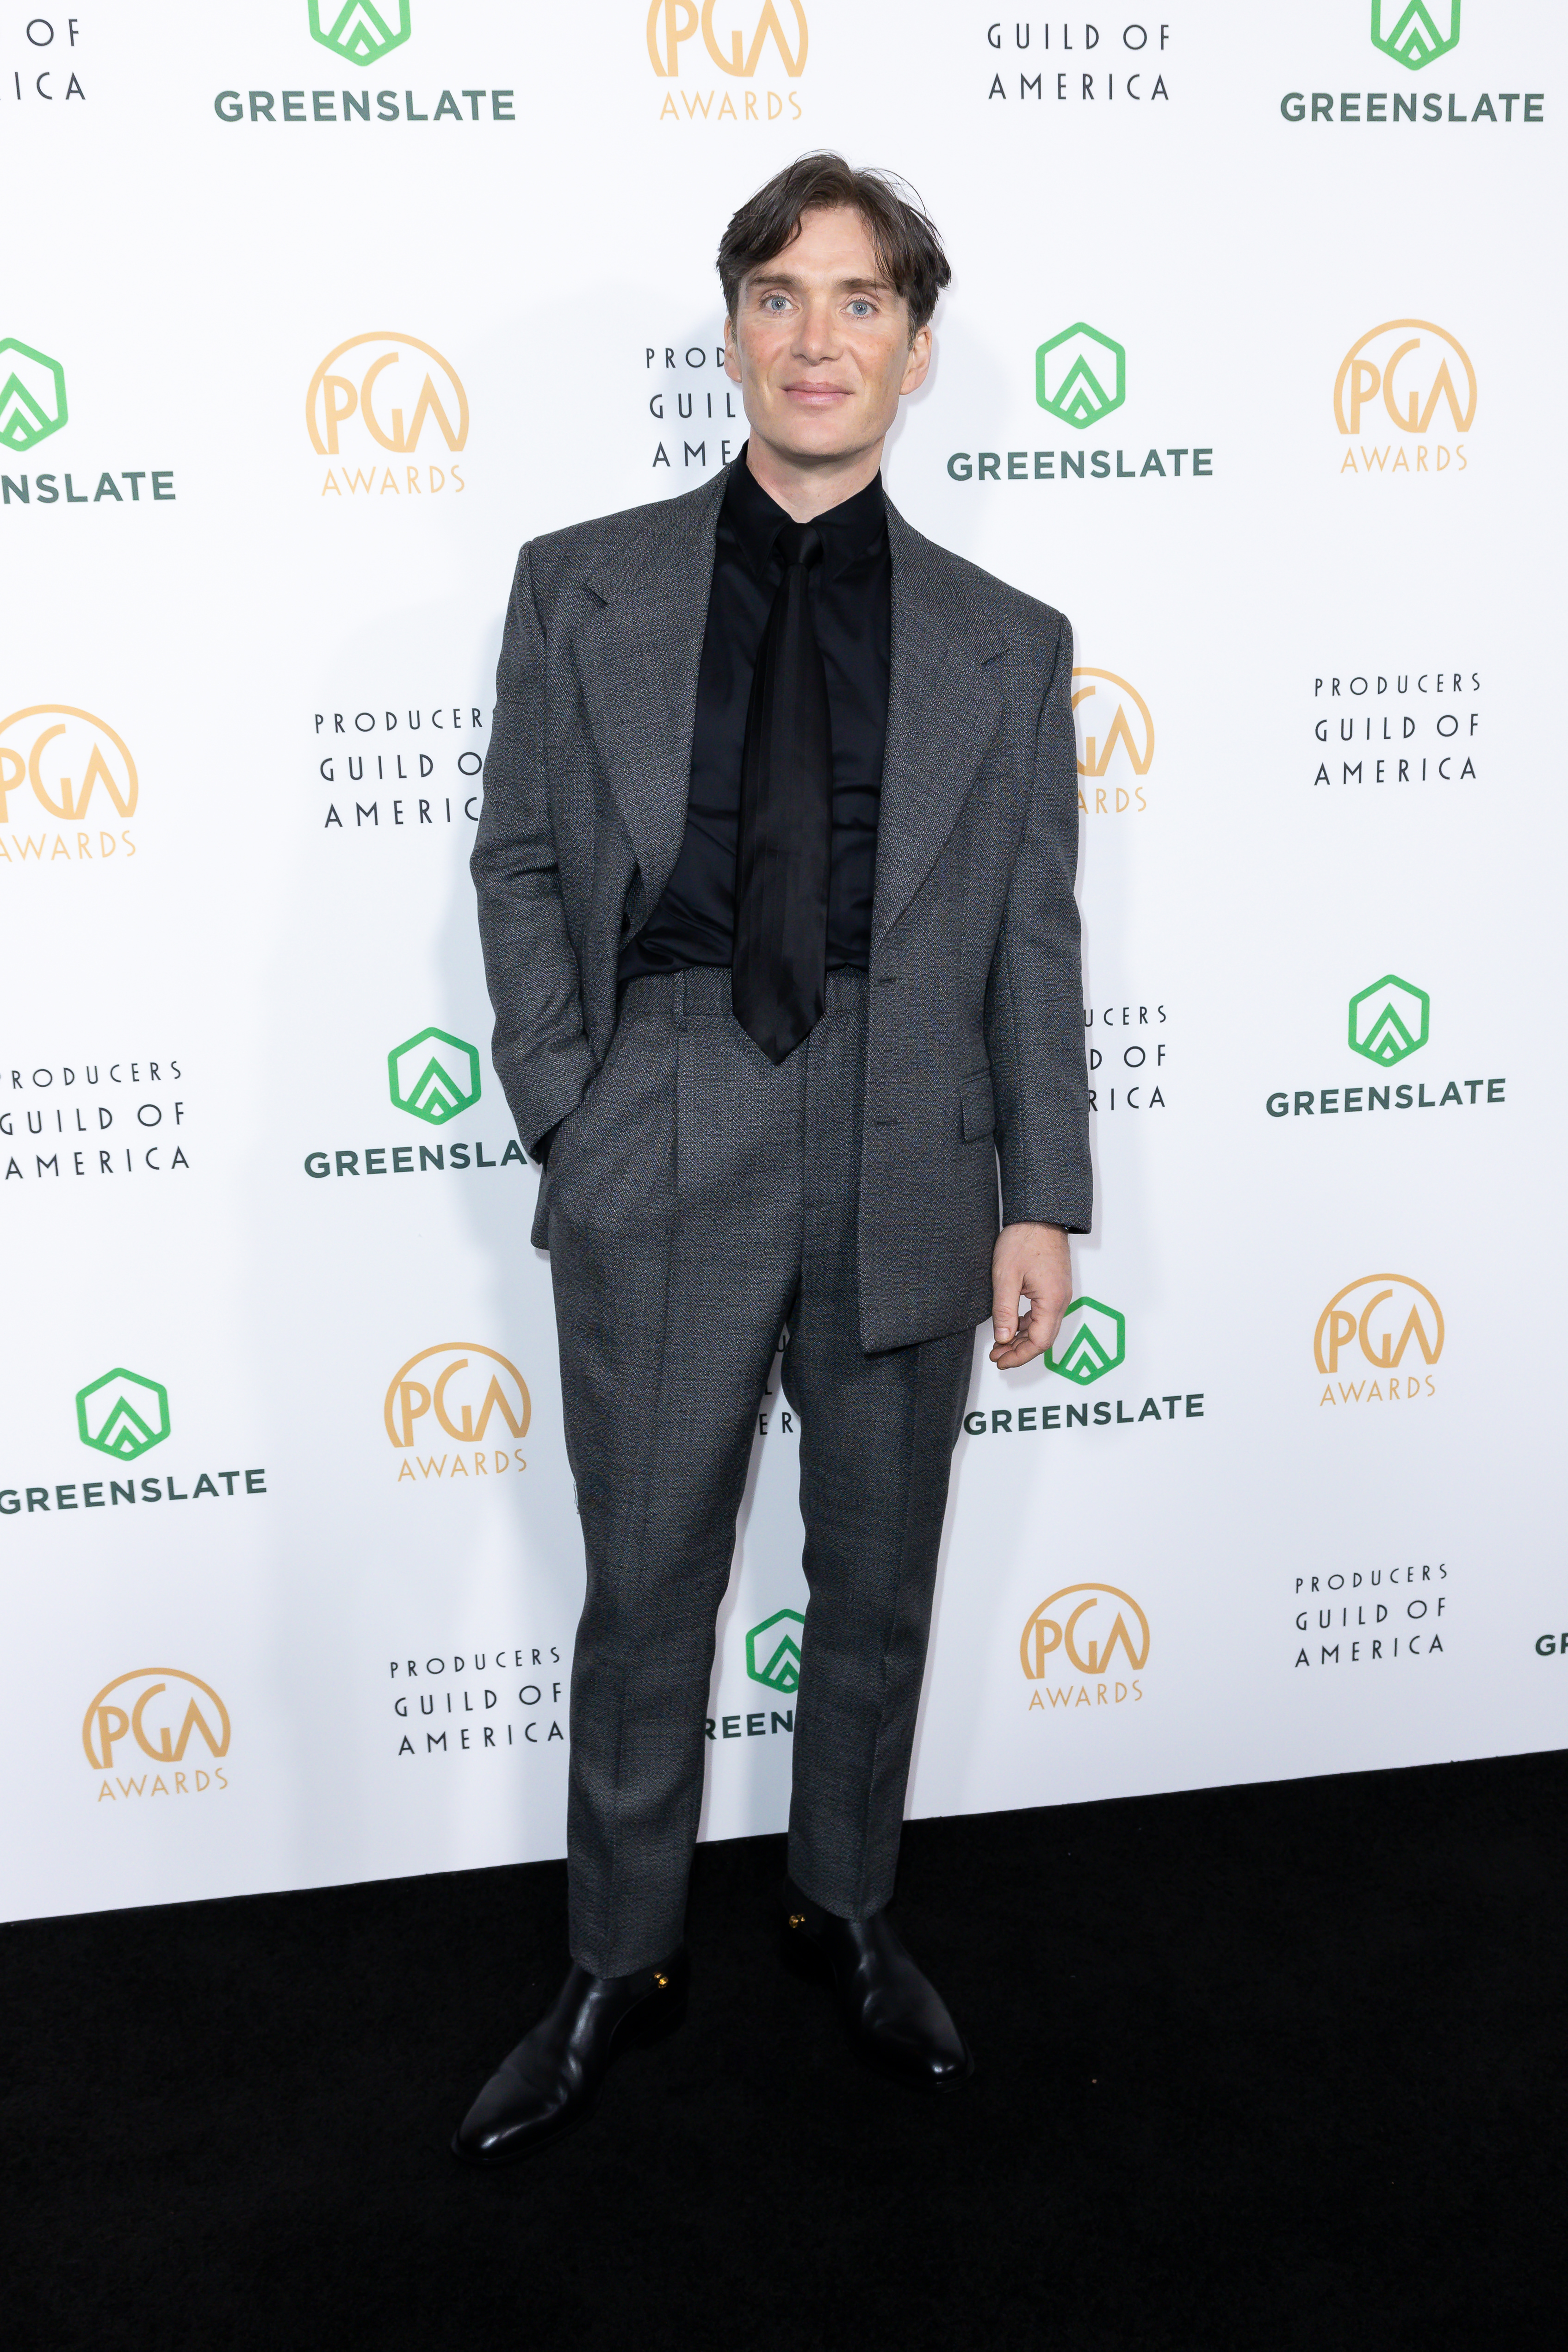 Cillian at event wearing a suit and tie